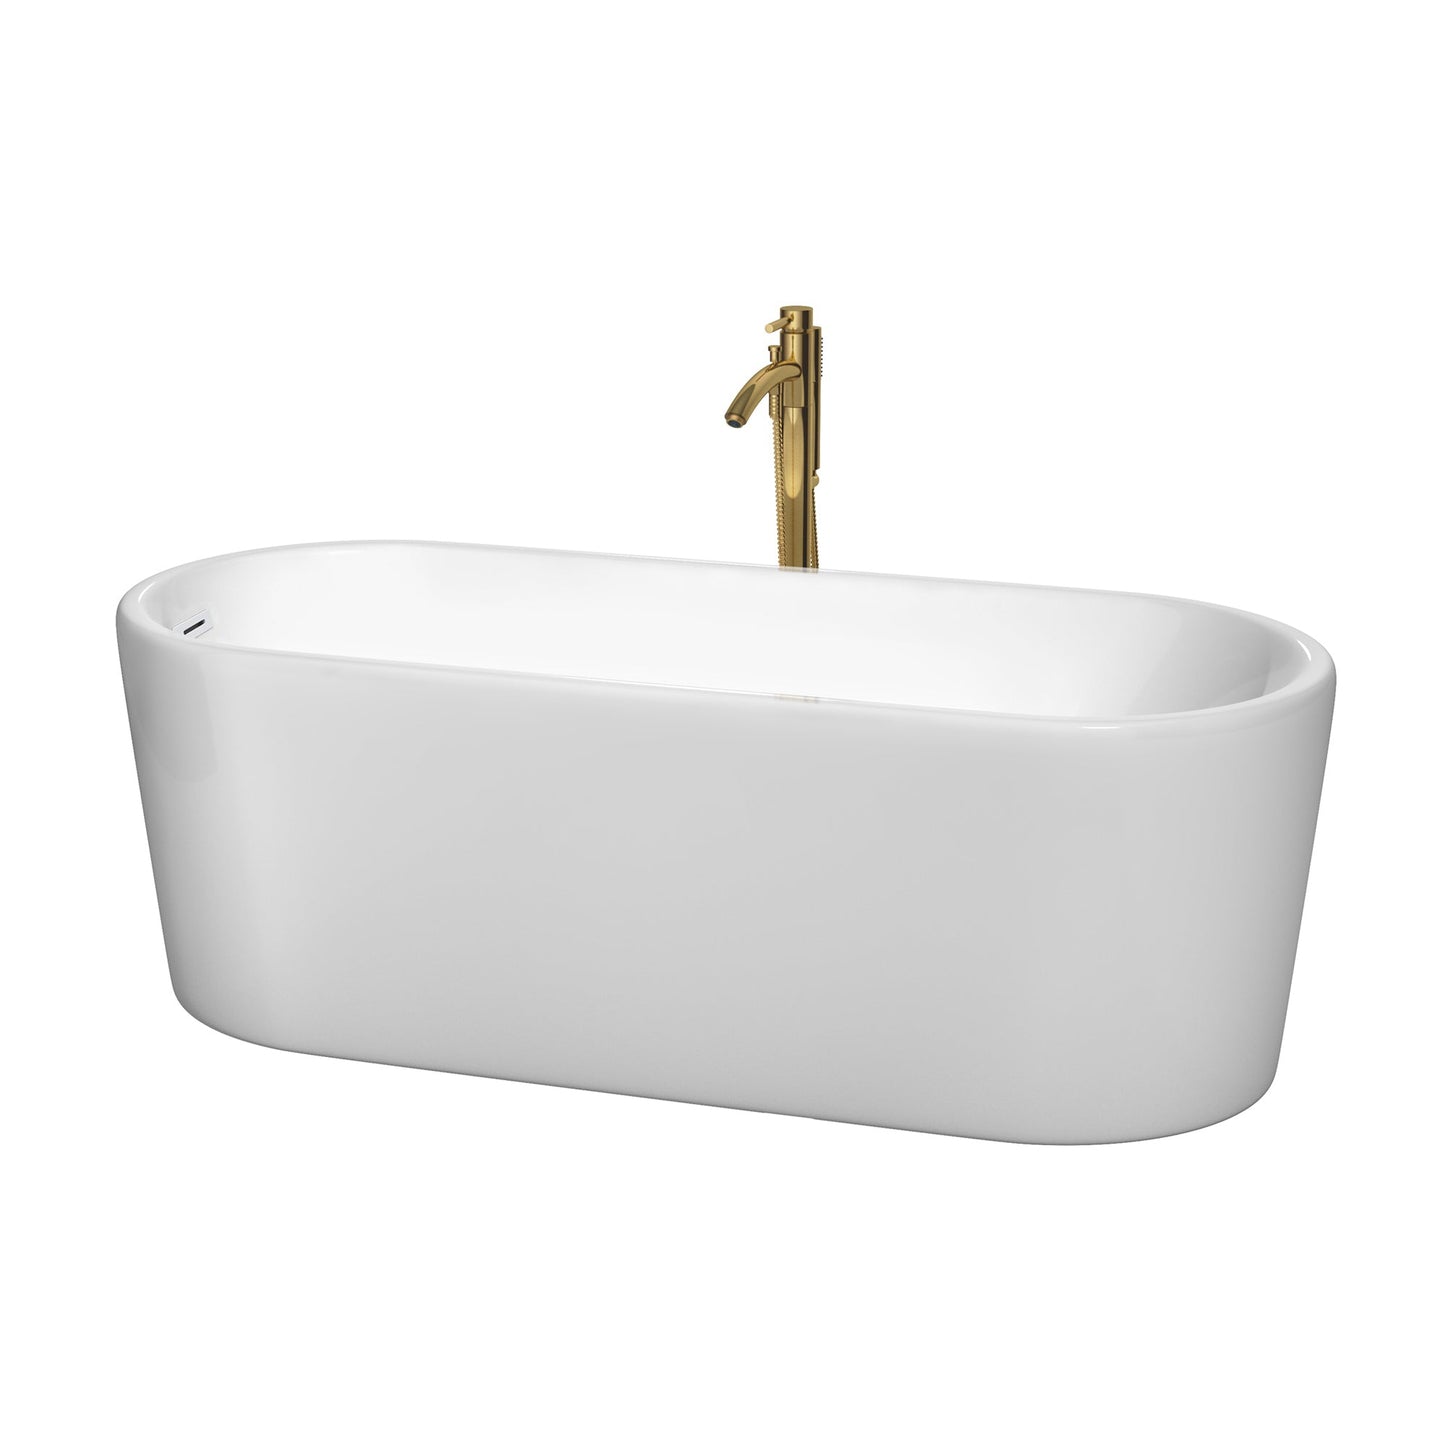 Wyndham Collection Ursula 67" Freestanding Bathtub in White With Shiny White Trim and Floor Mounted Faucet in Brushed Gold